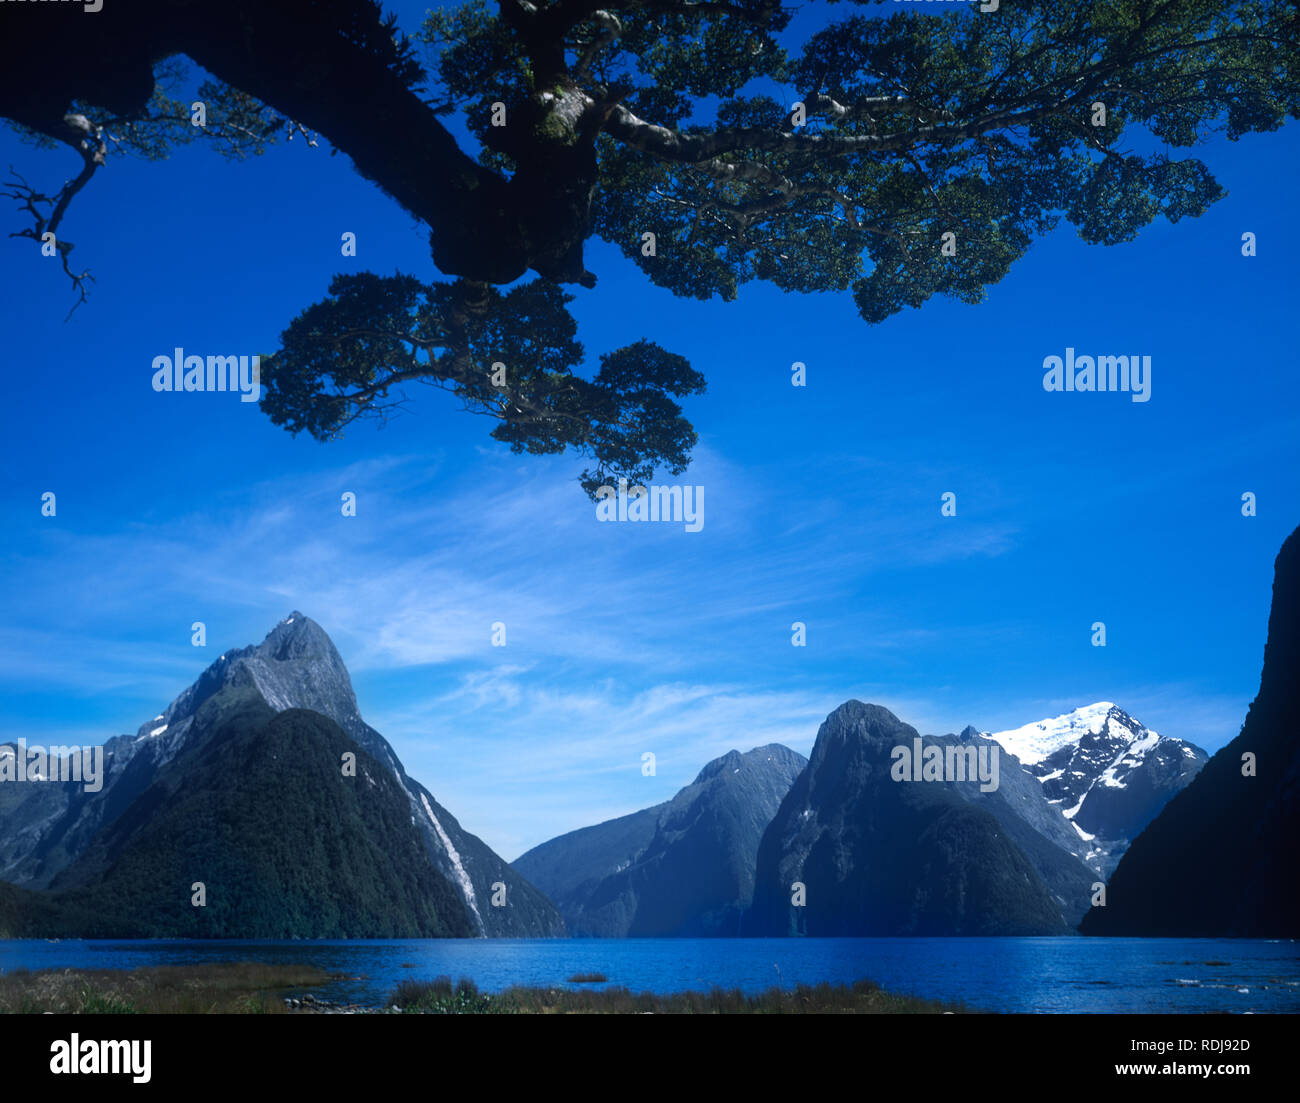 The Milford Sound, South Island New Zealand Stock Photo